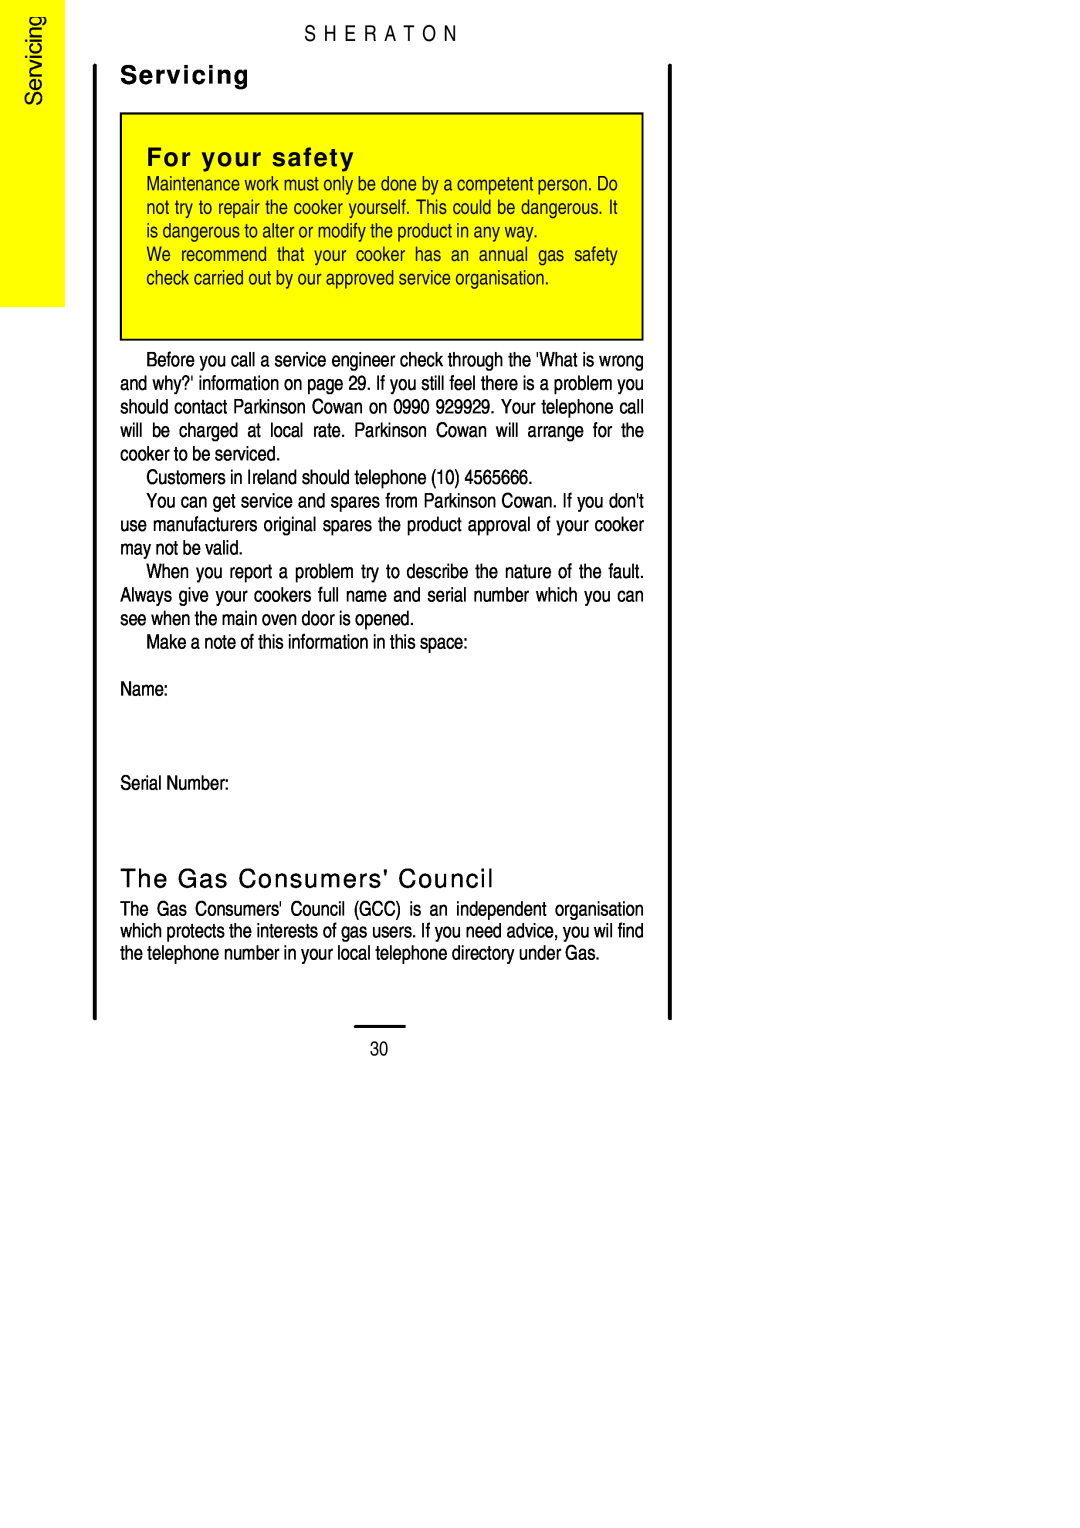 Parkinson Cowan U02059 installation instructions Servicing For your safety, The Gas Consumers Council, S H E R A T O N 